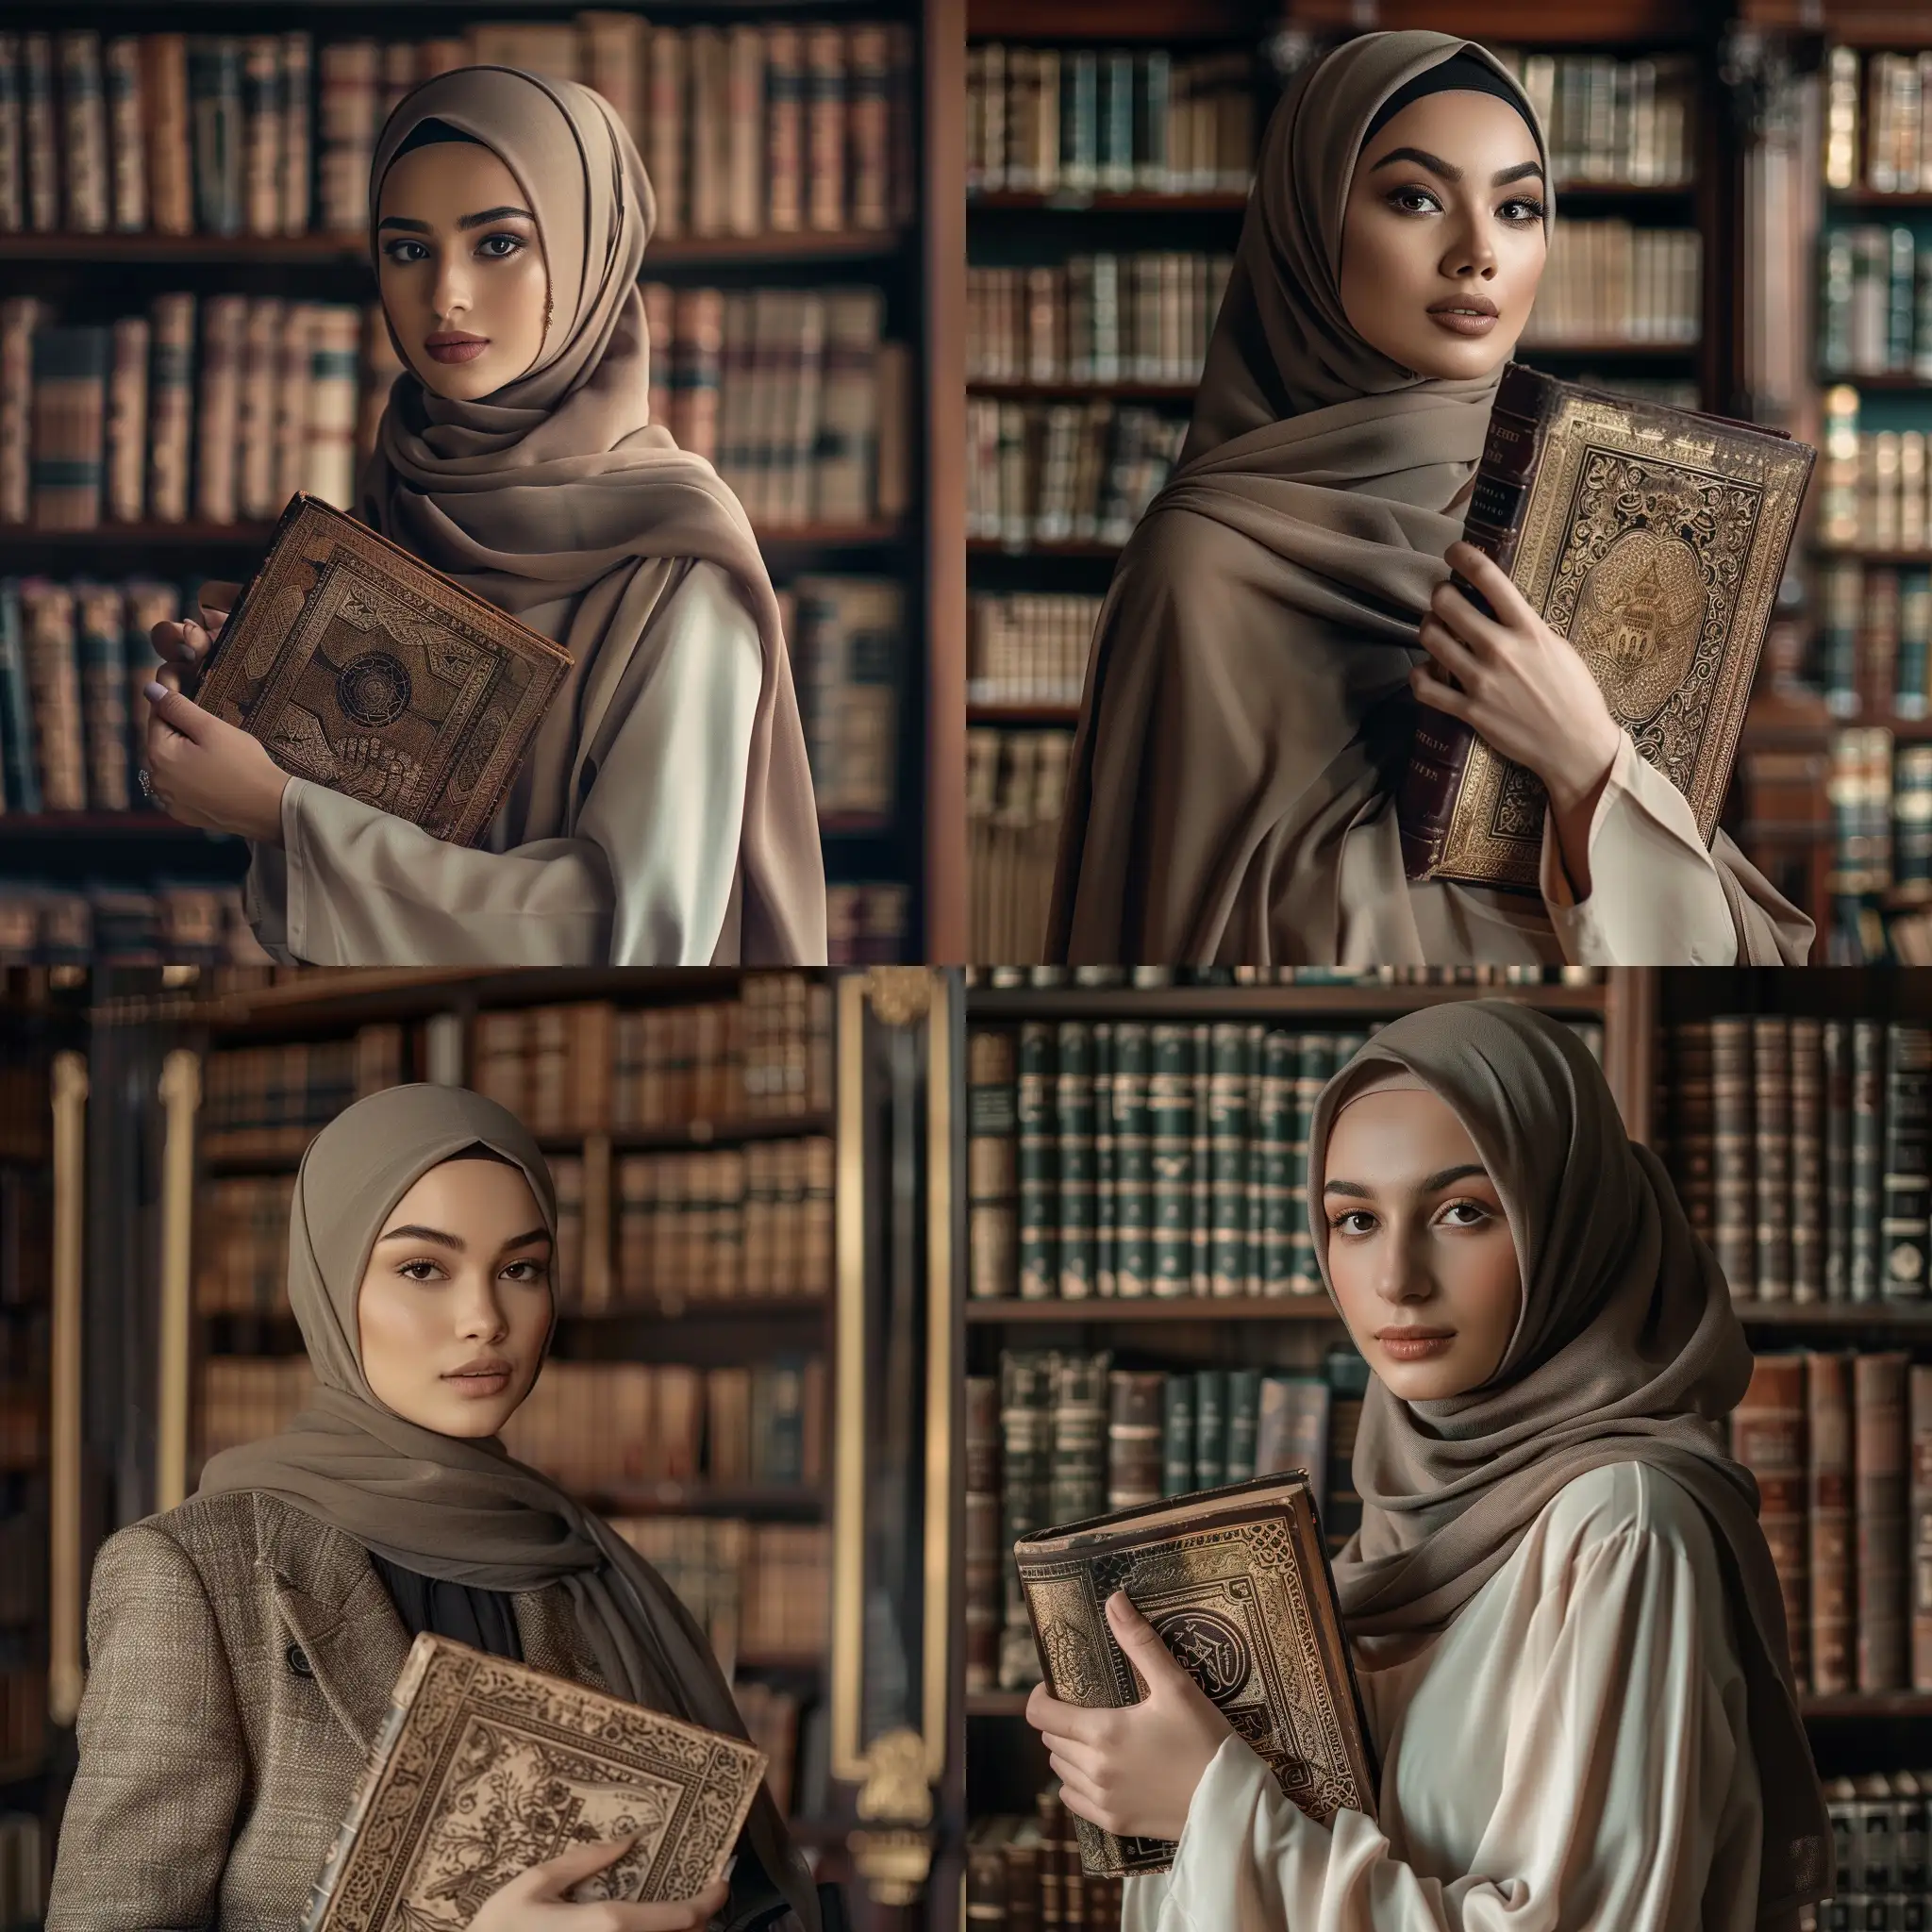 A sophisticated and stylish portrait of a young, Muslim bibliophile in a tasteful hijab, with a backdrop of a classic library. The photo captures her poised and contemplative expression as she holds a vintage book, showcasing her love for timeless literature